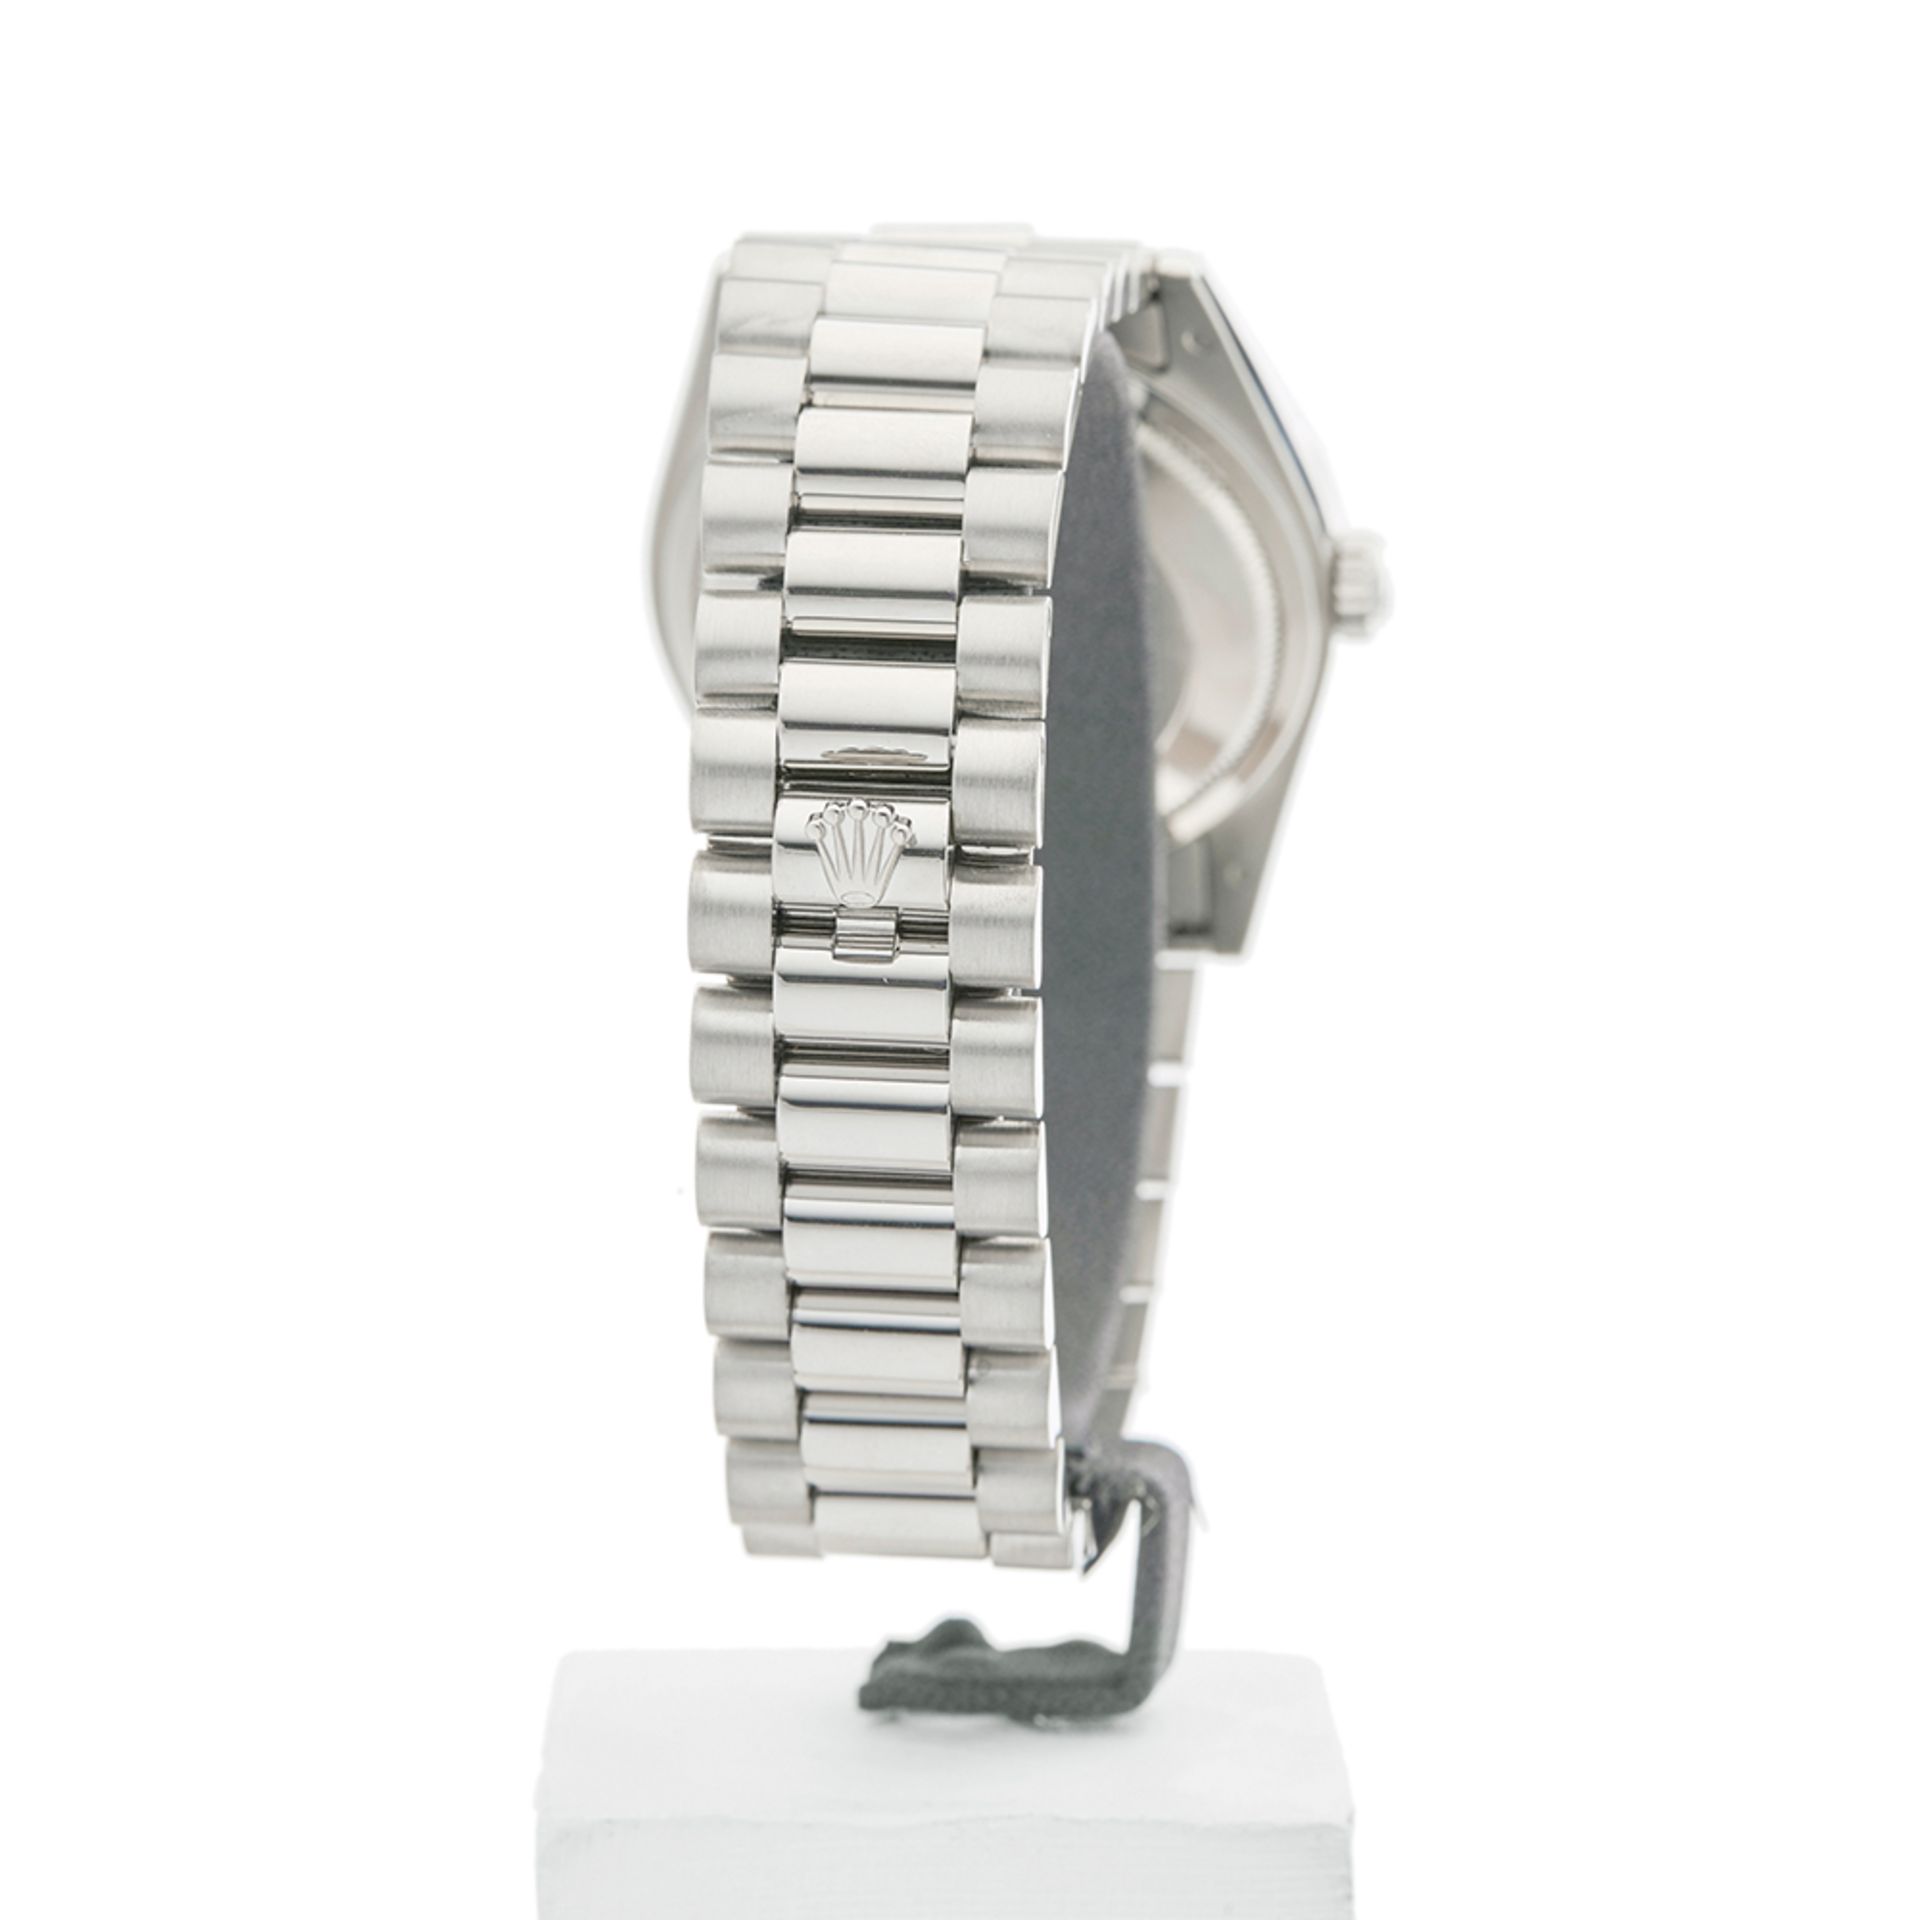 Day-Date 36mm 18k White Gold 118239 - Image 7 of 9